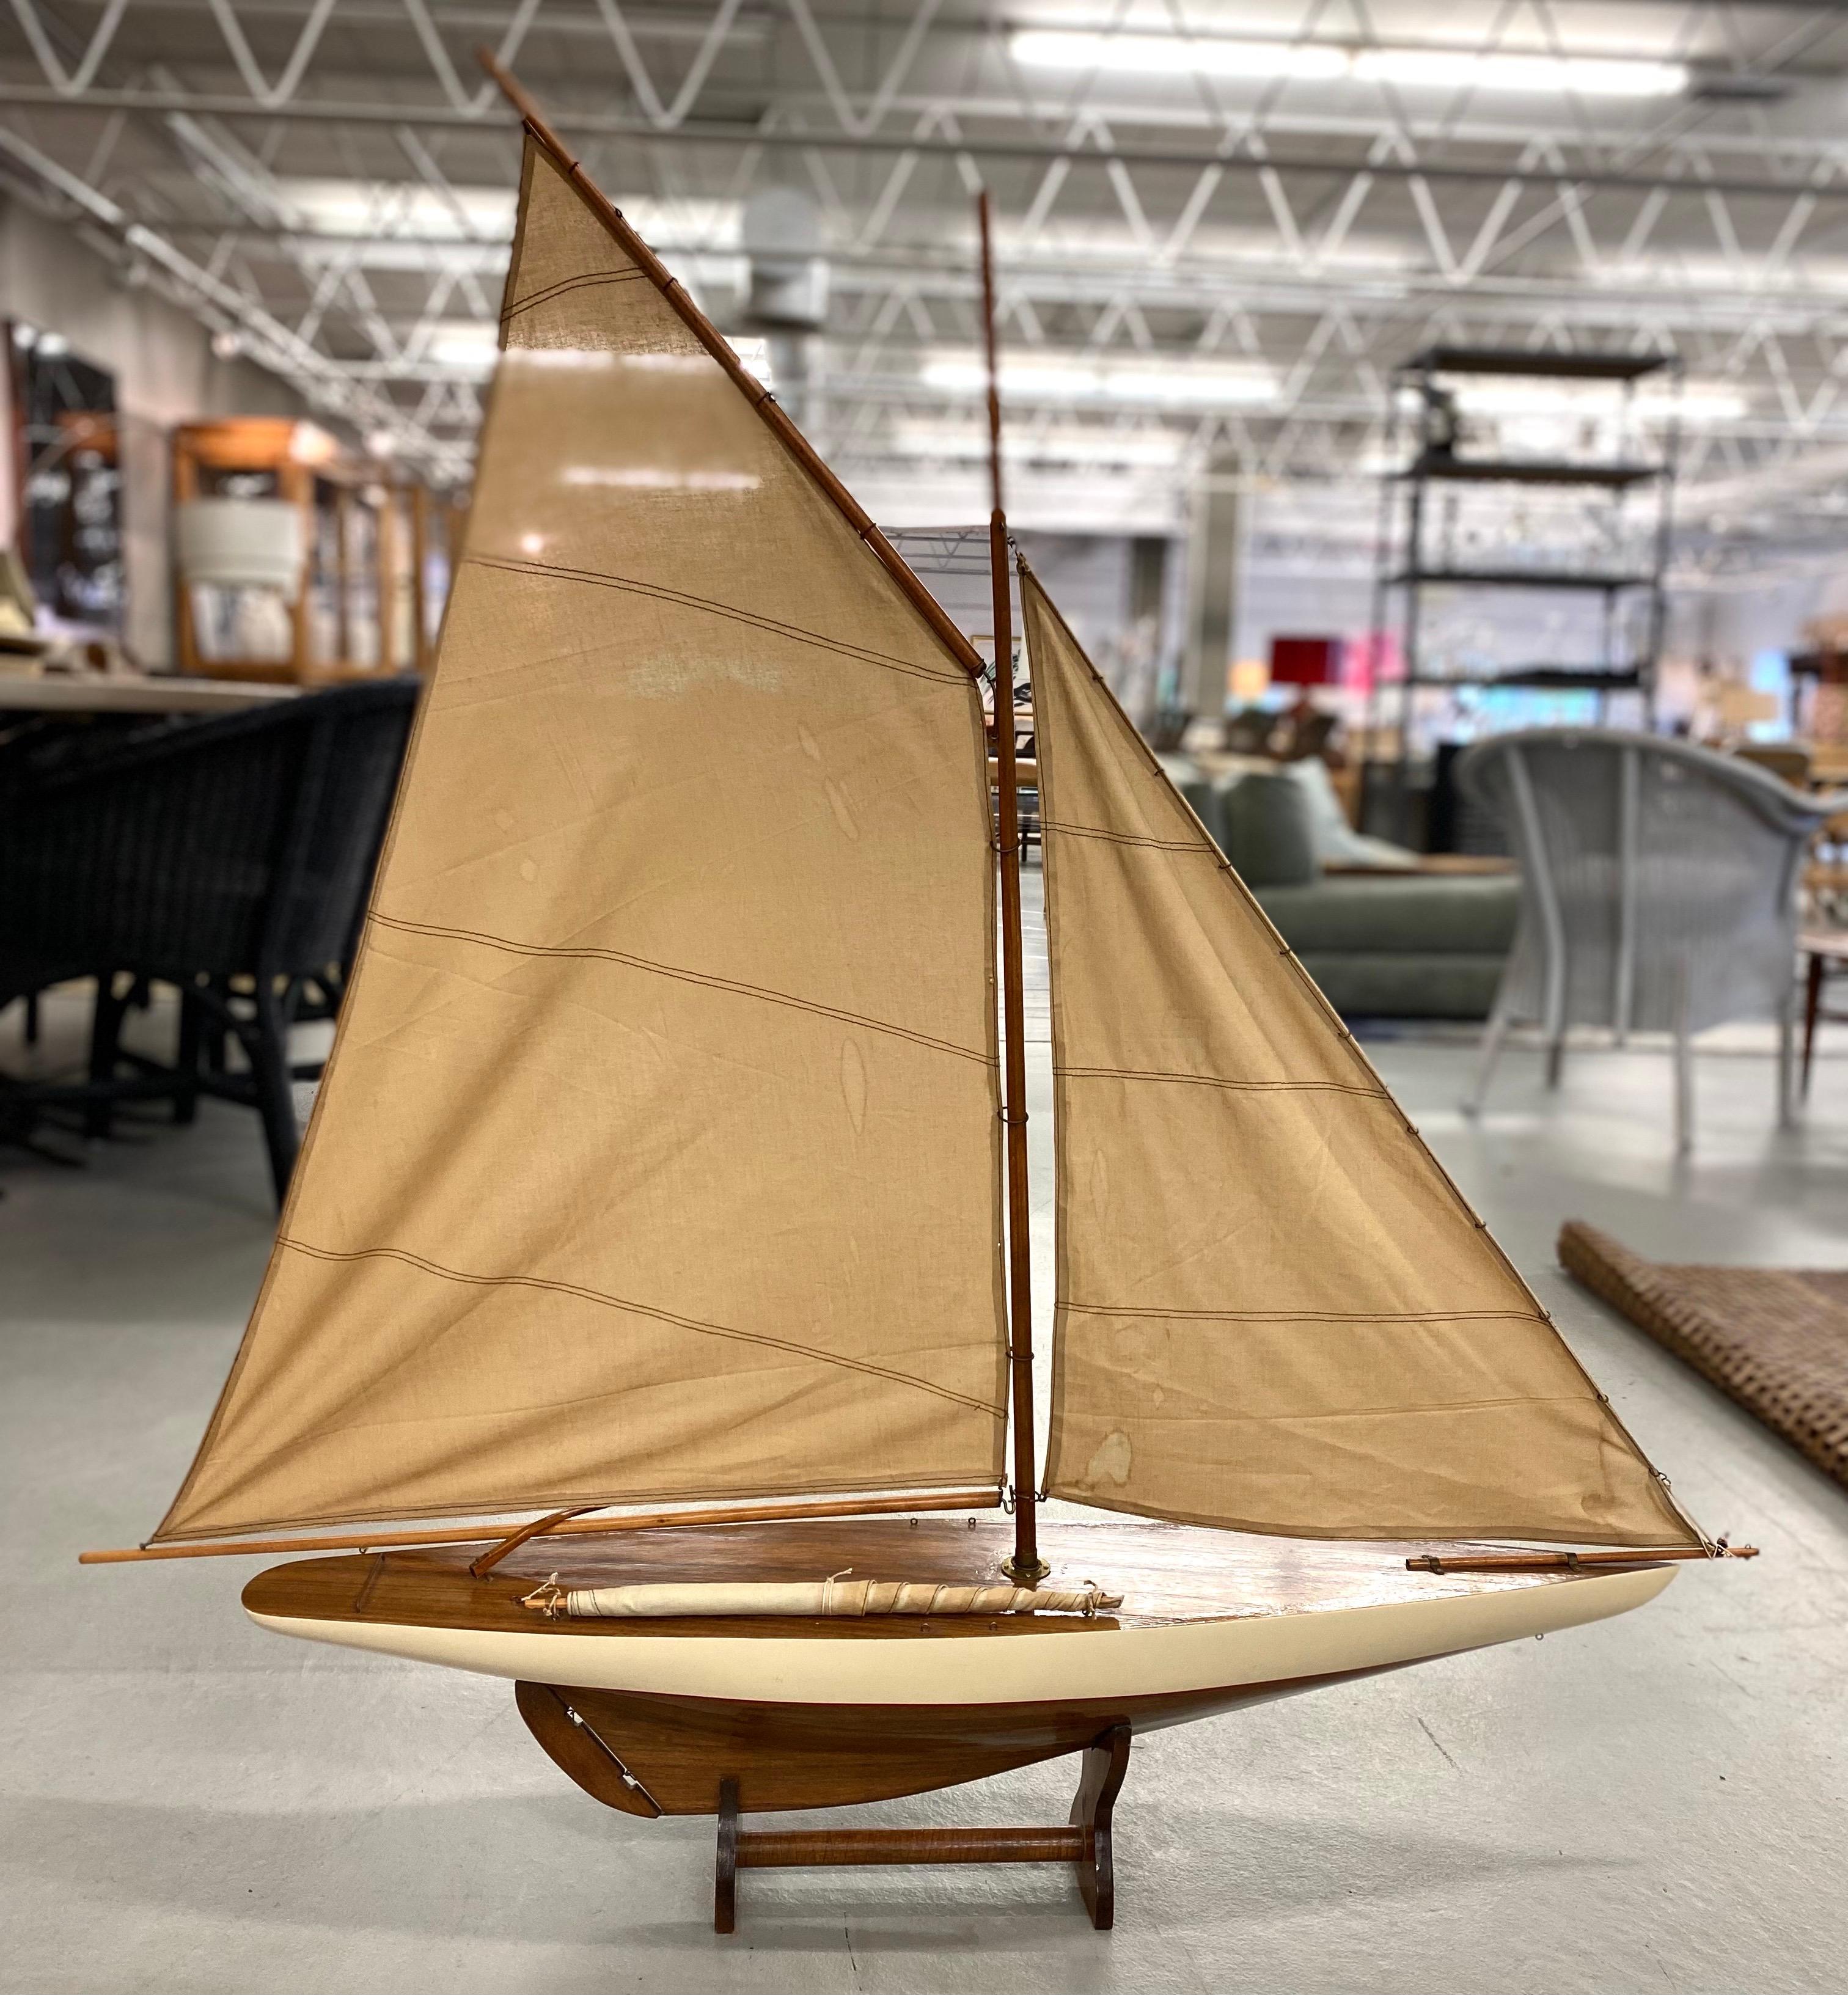 Wooden sail boat

Measures: 43